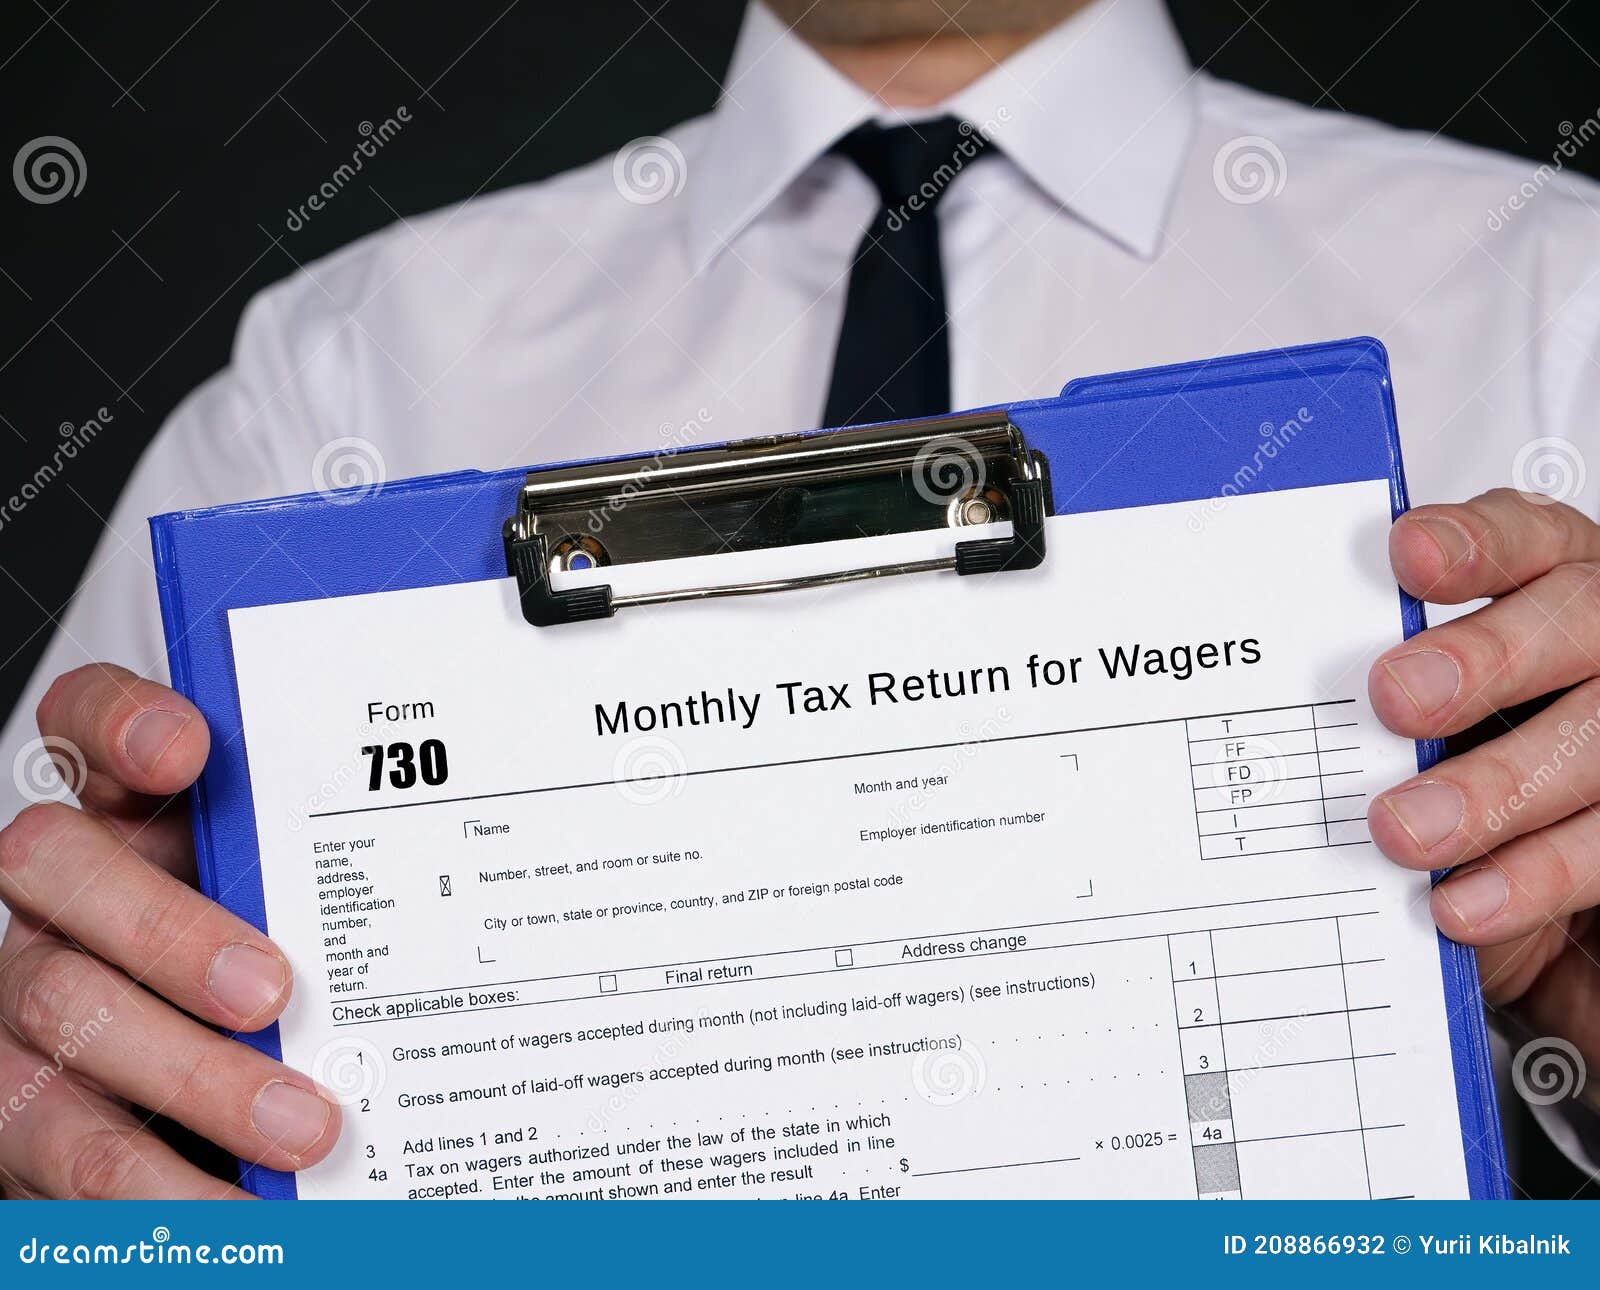 form 730 monthly tax return for wagers